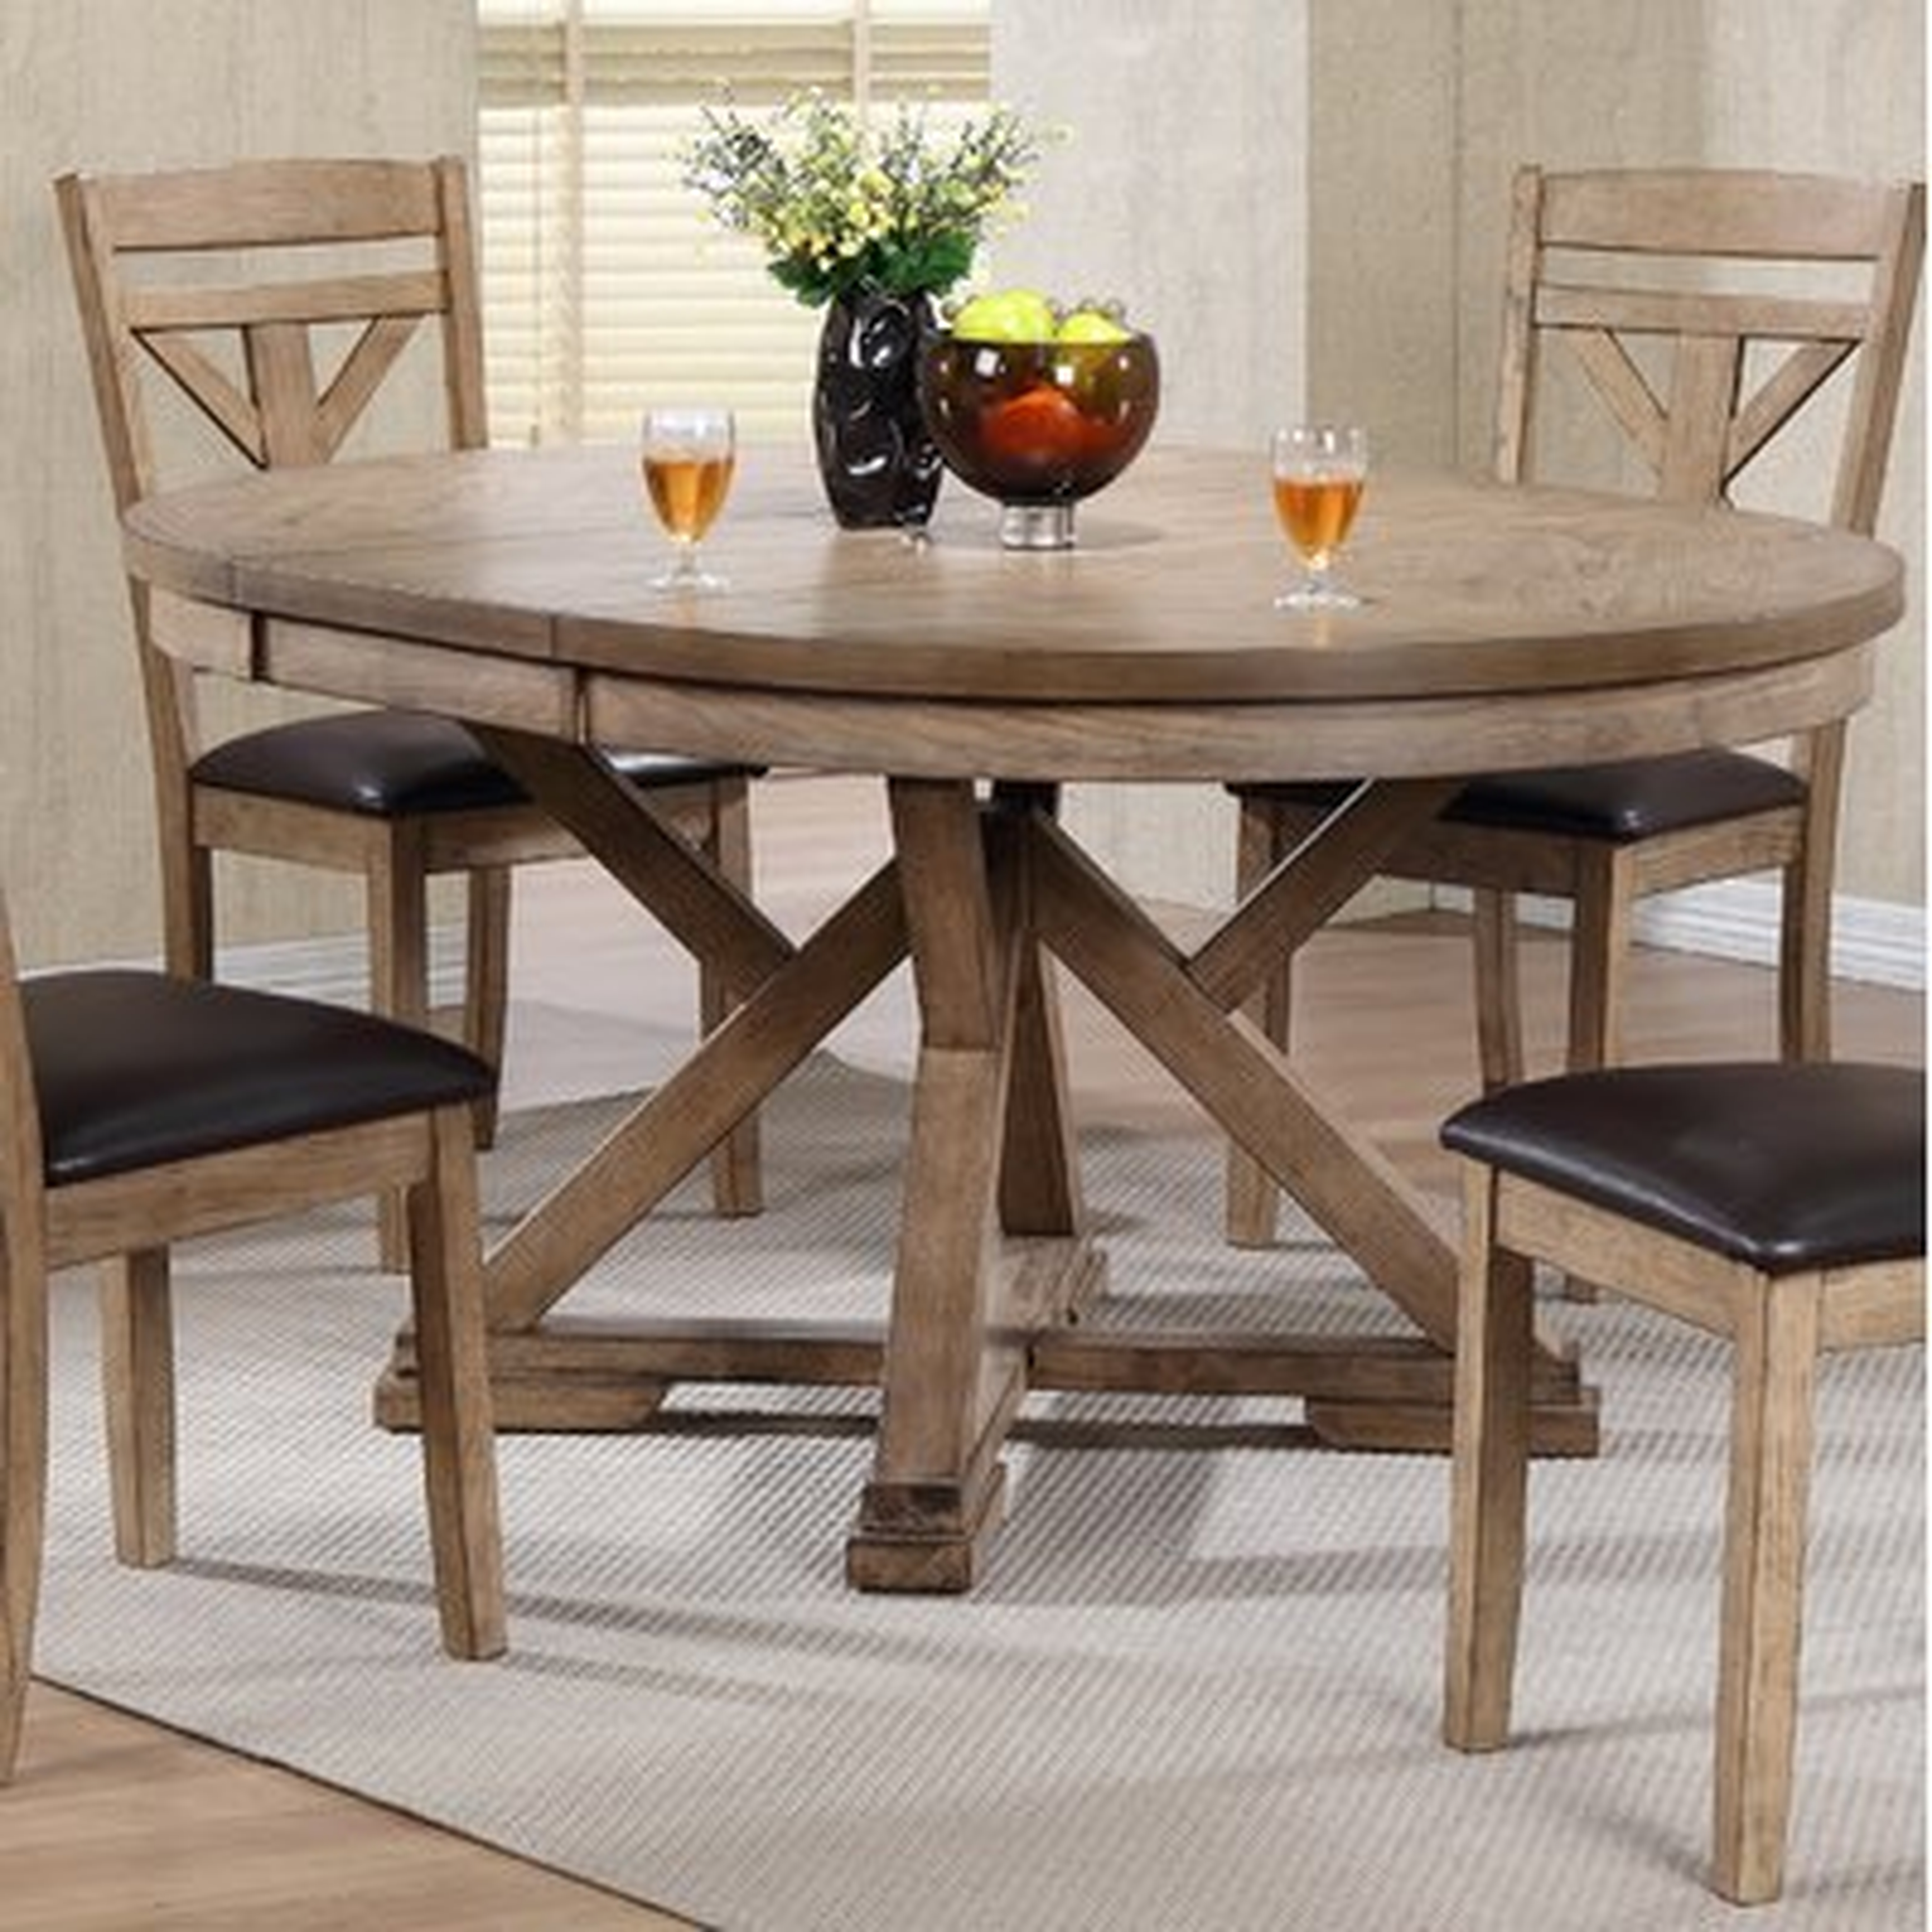 Carnspindle Round Butterfly Leaf Dining Table - Wayfair